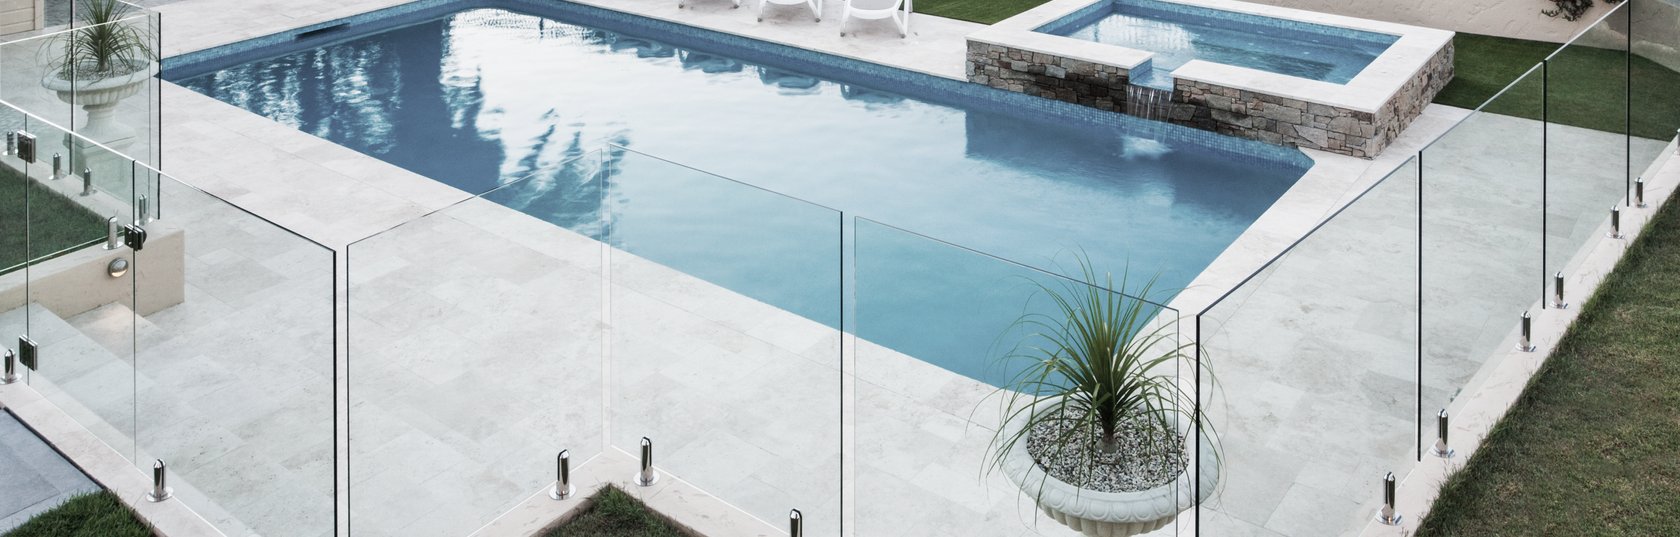 Glass pool fencing in Australia - our top tips